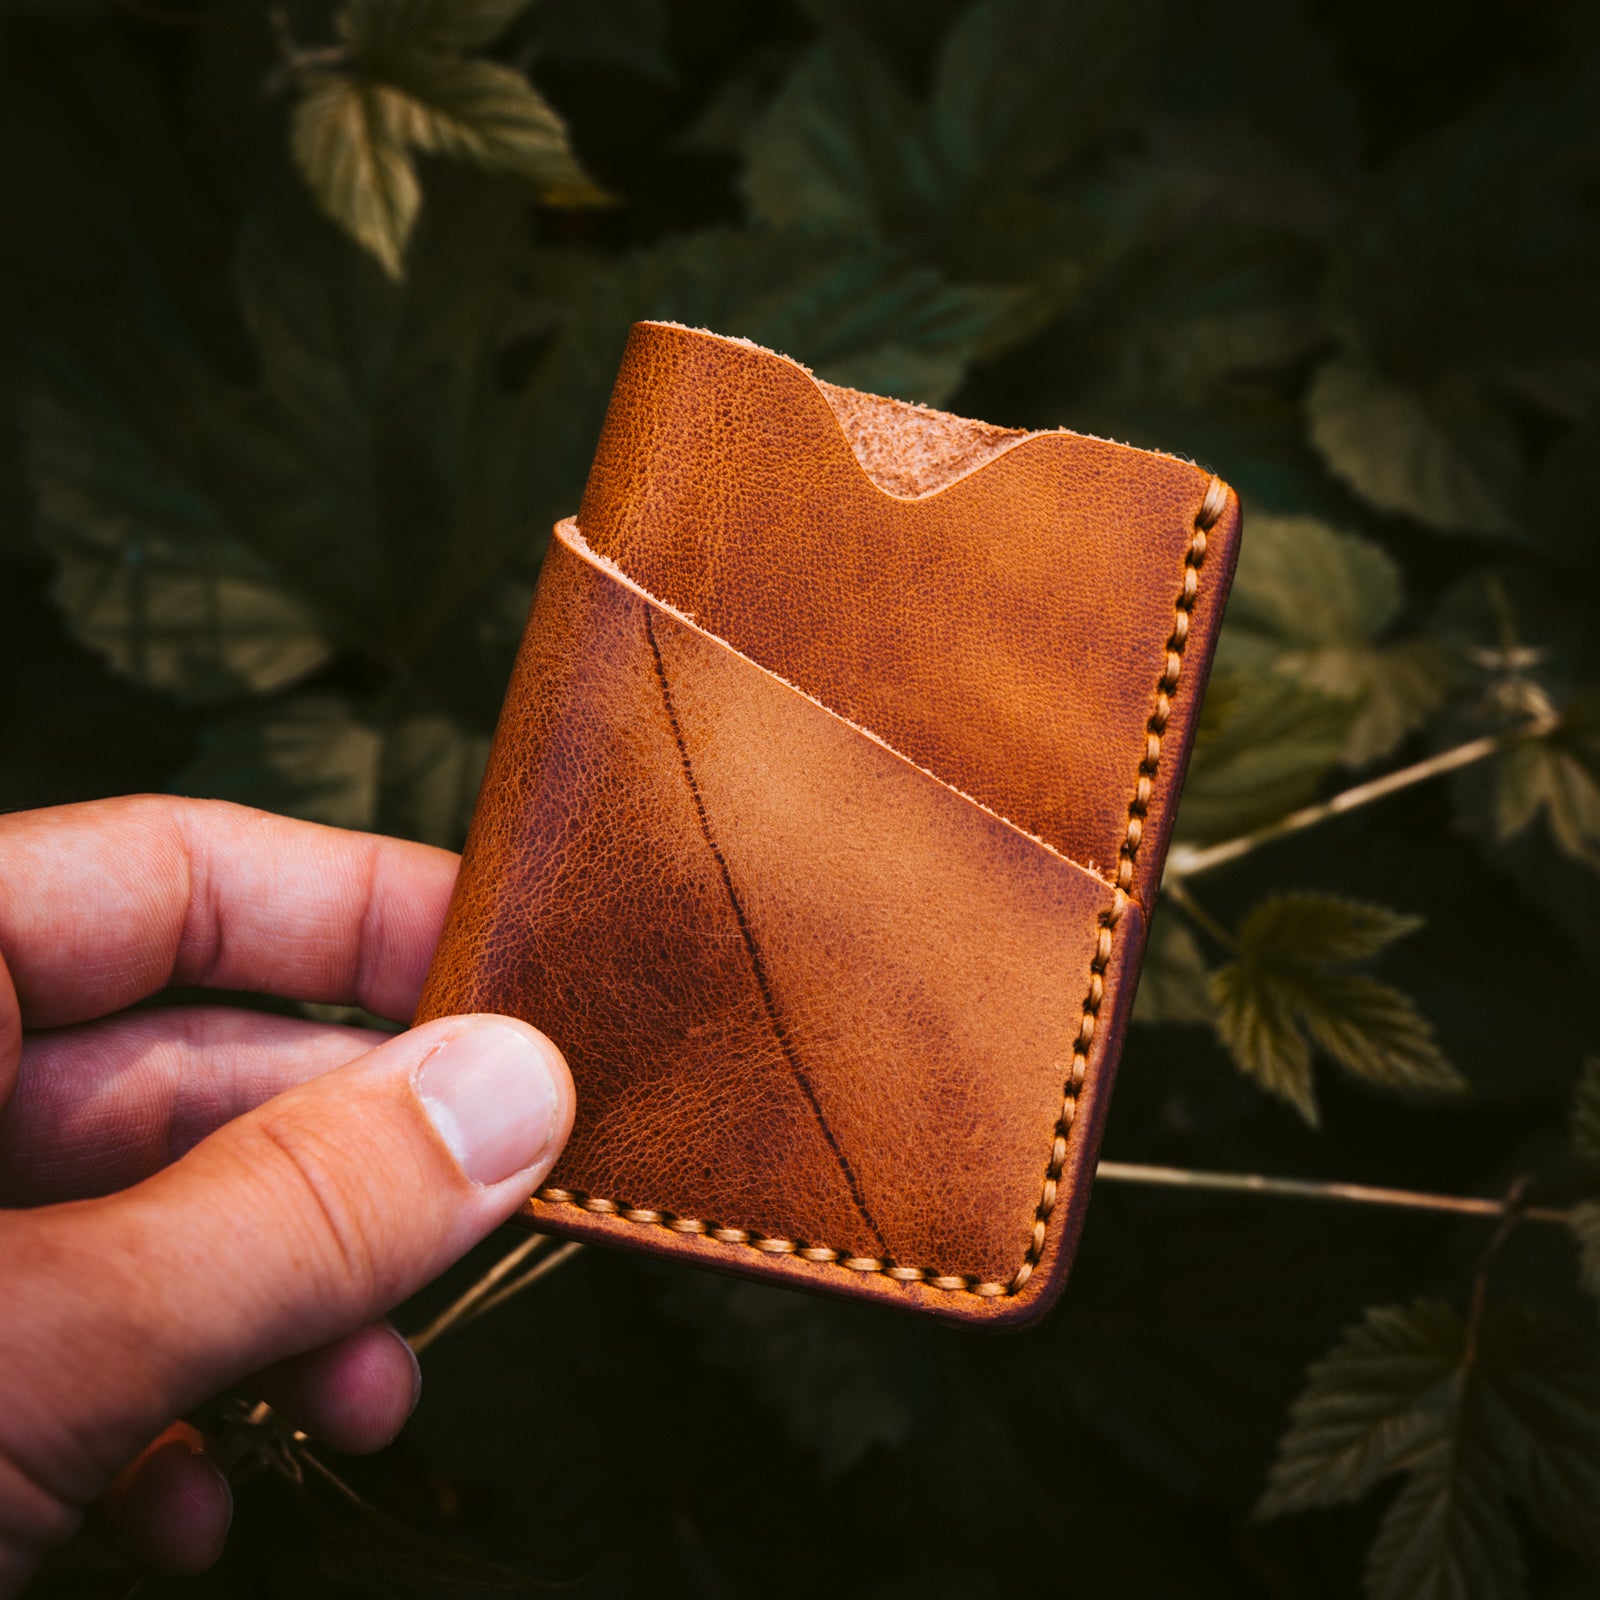 Cow/Calf Leather Wallets Archives - Babu Handmade Leather